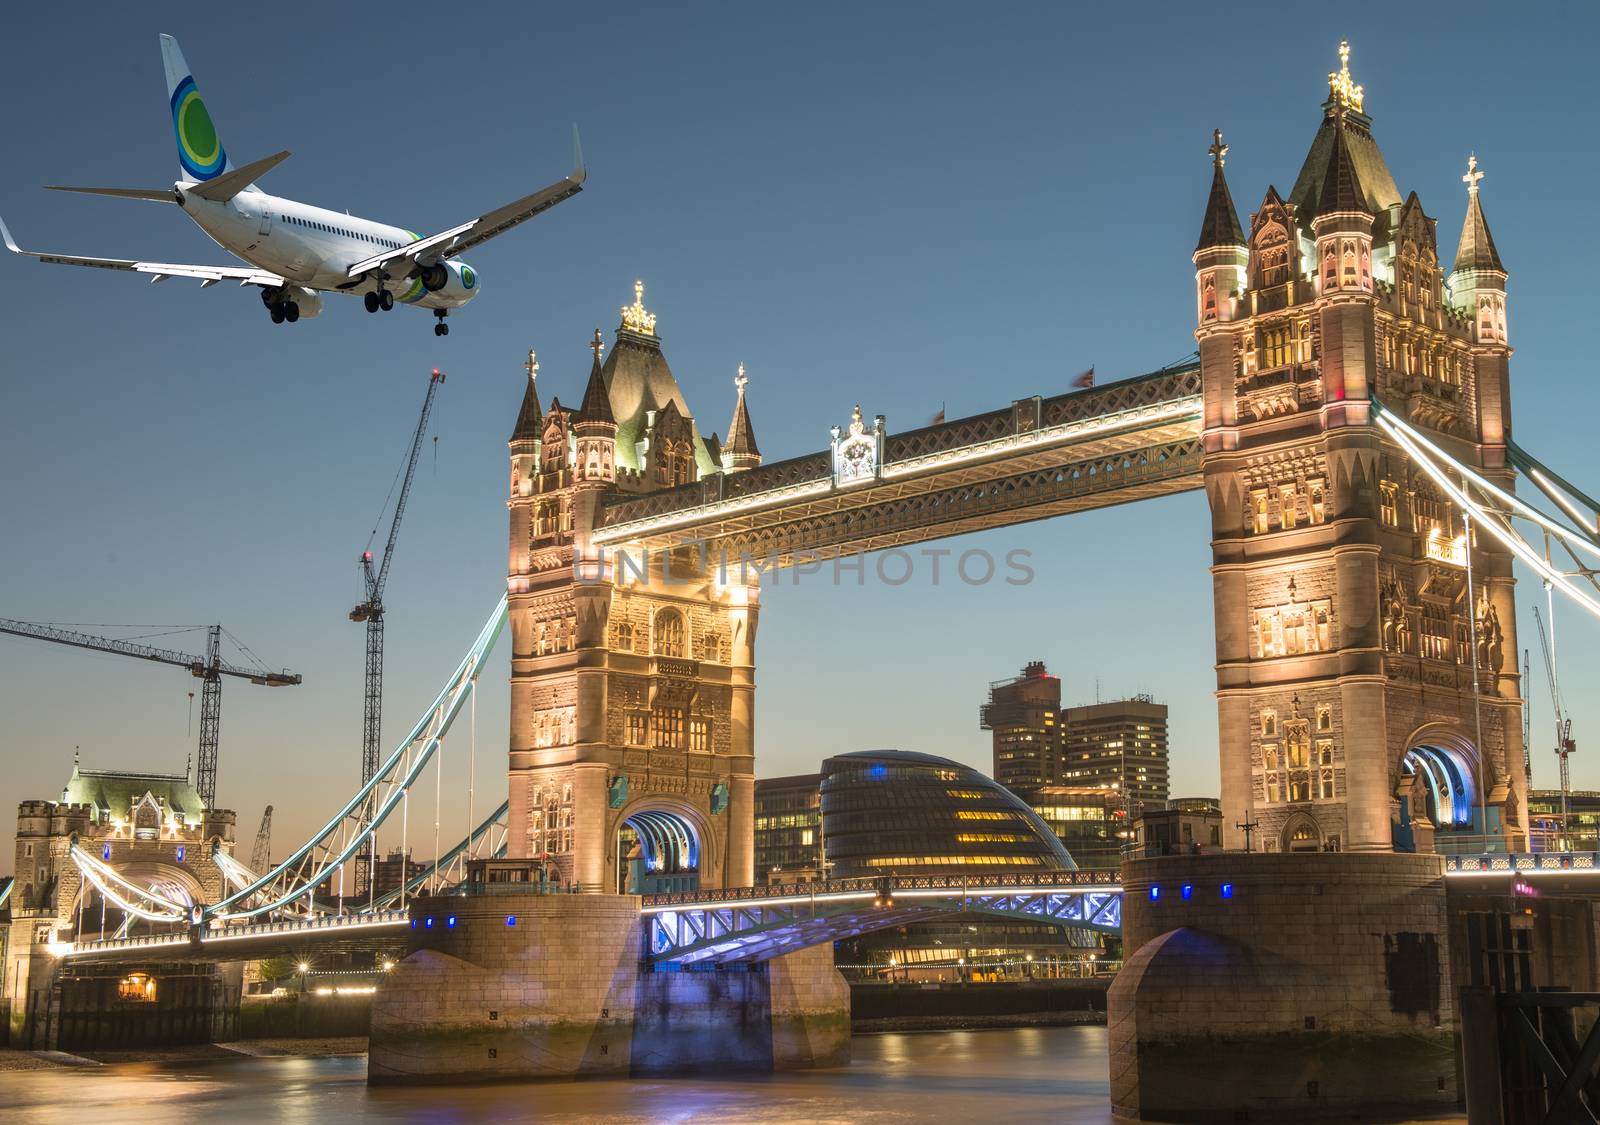 Airplane overflying London by jovannig